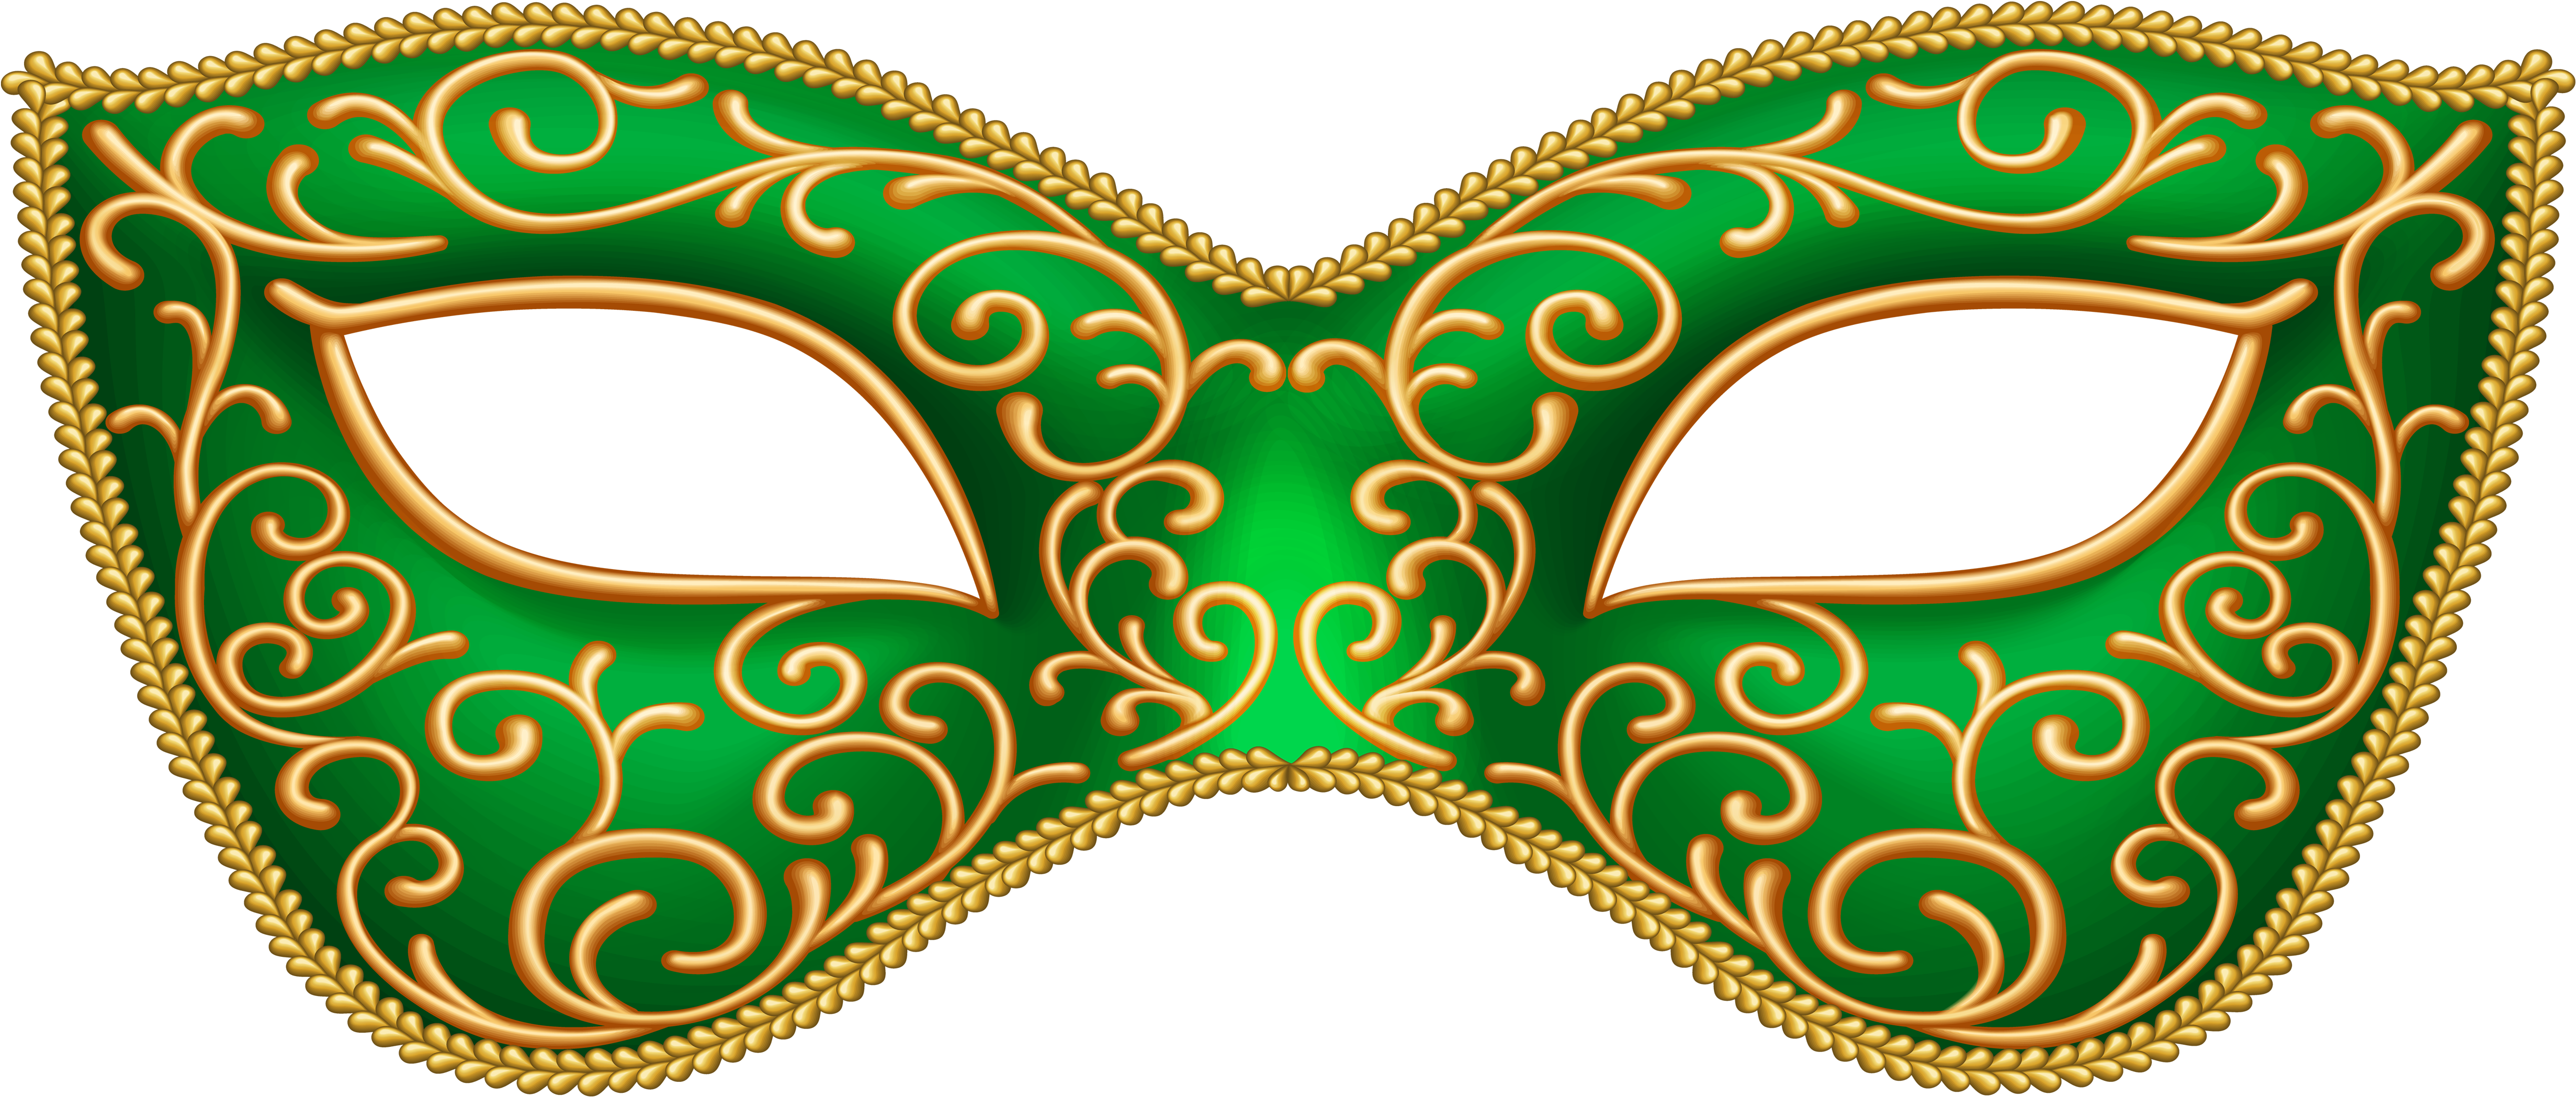 A Green And Gold Mask